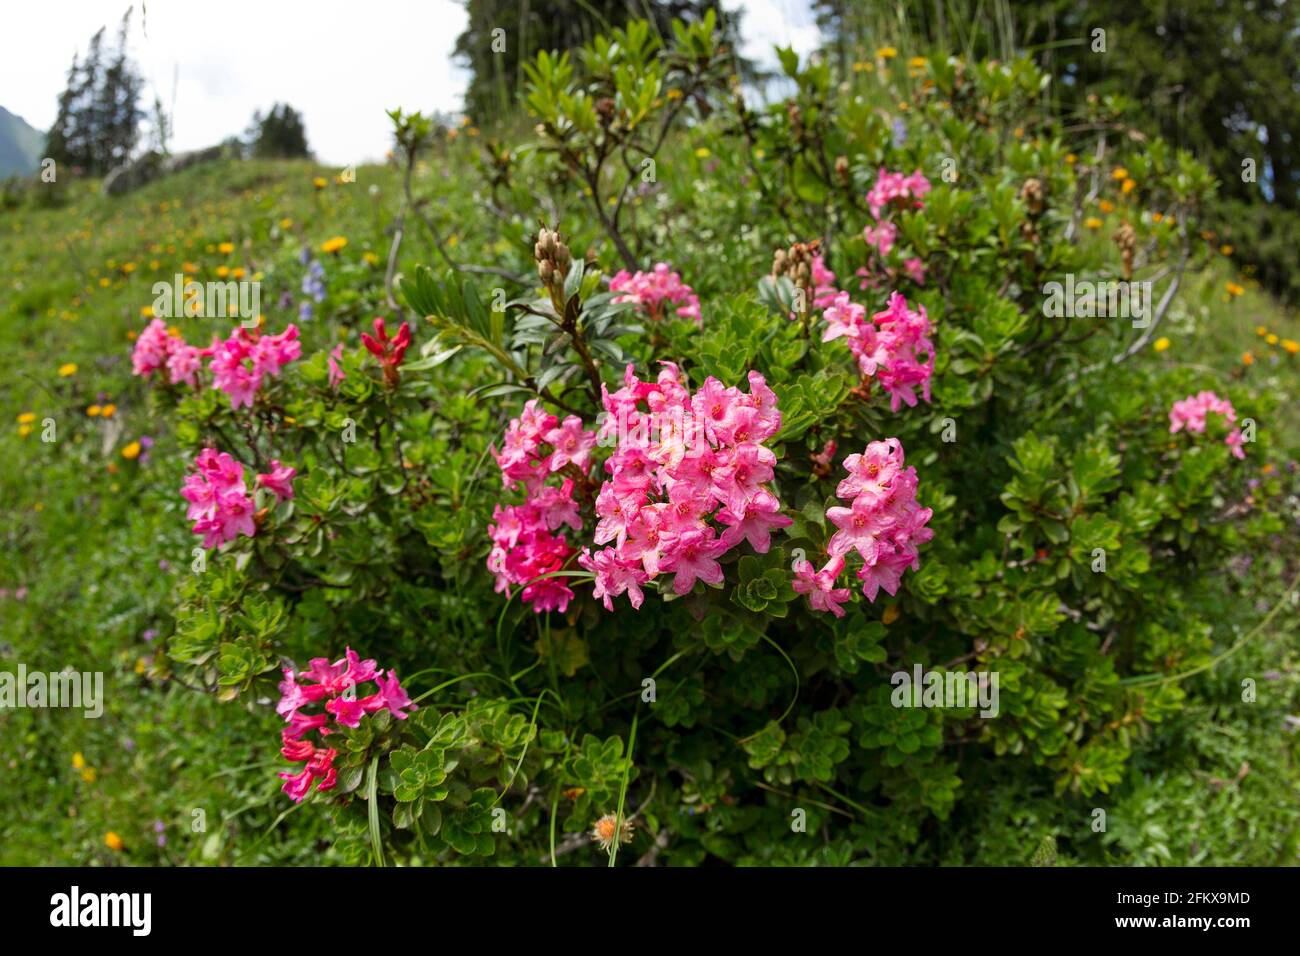 Alpenrose, Rhododendron Stock Photo